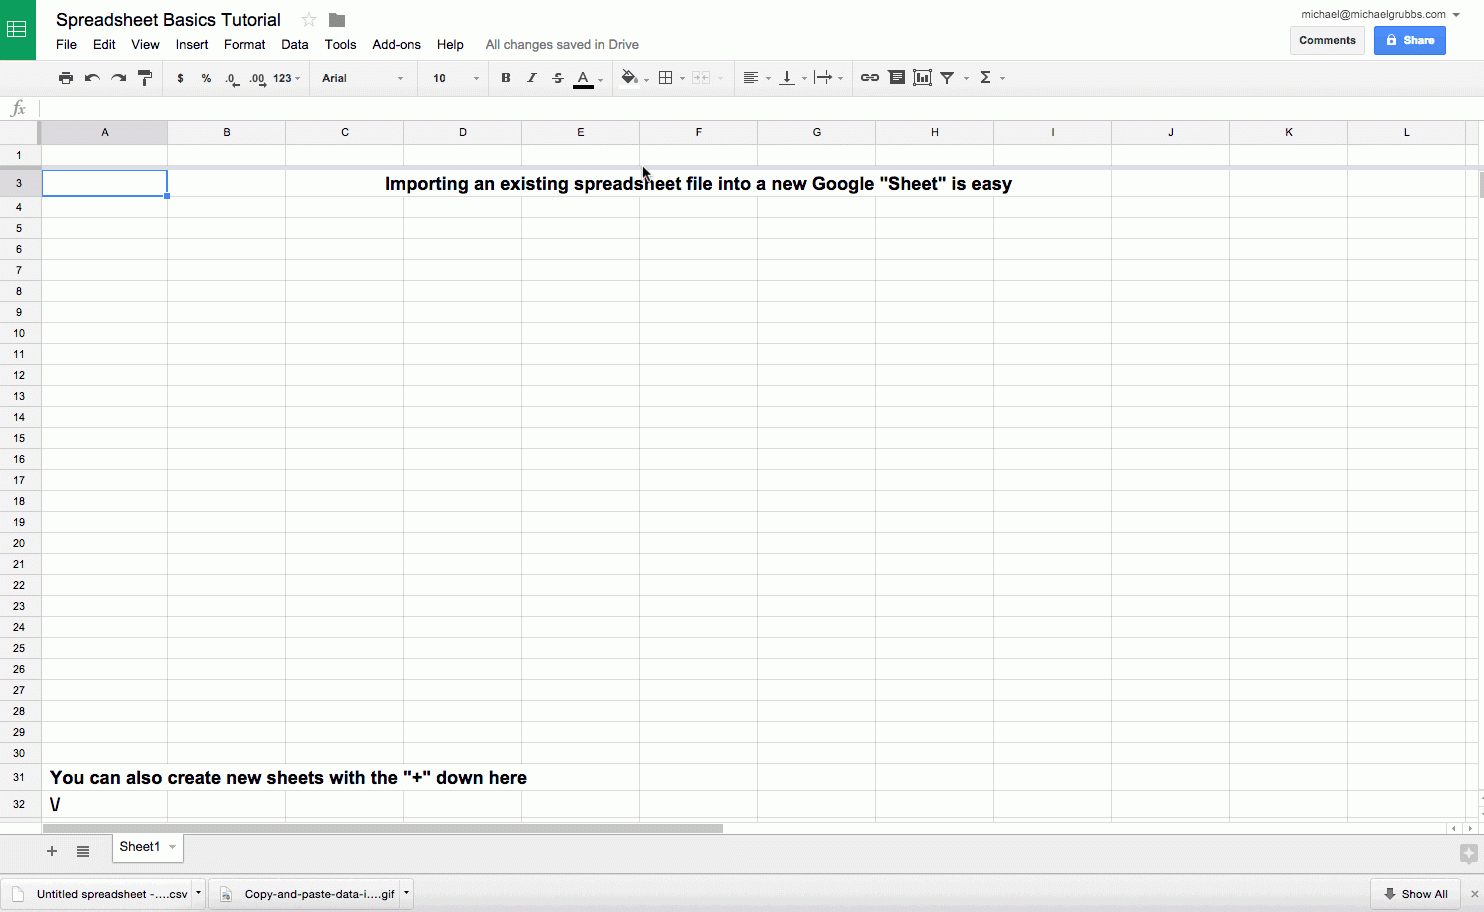 Google Spreadsheet Sign In For Google Sheets 101: The Beginner's Guide To Online Spreadsheets  The